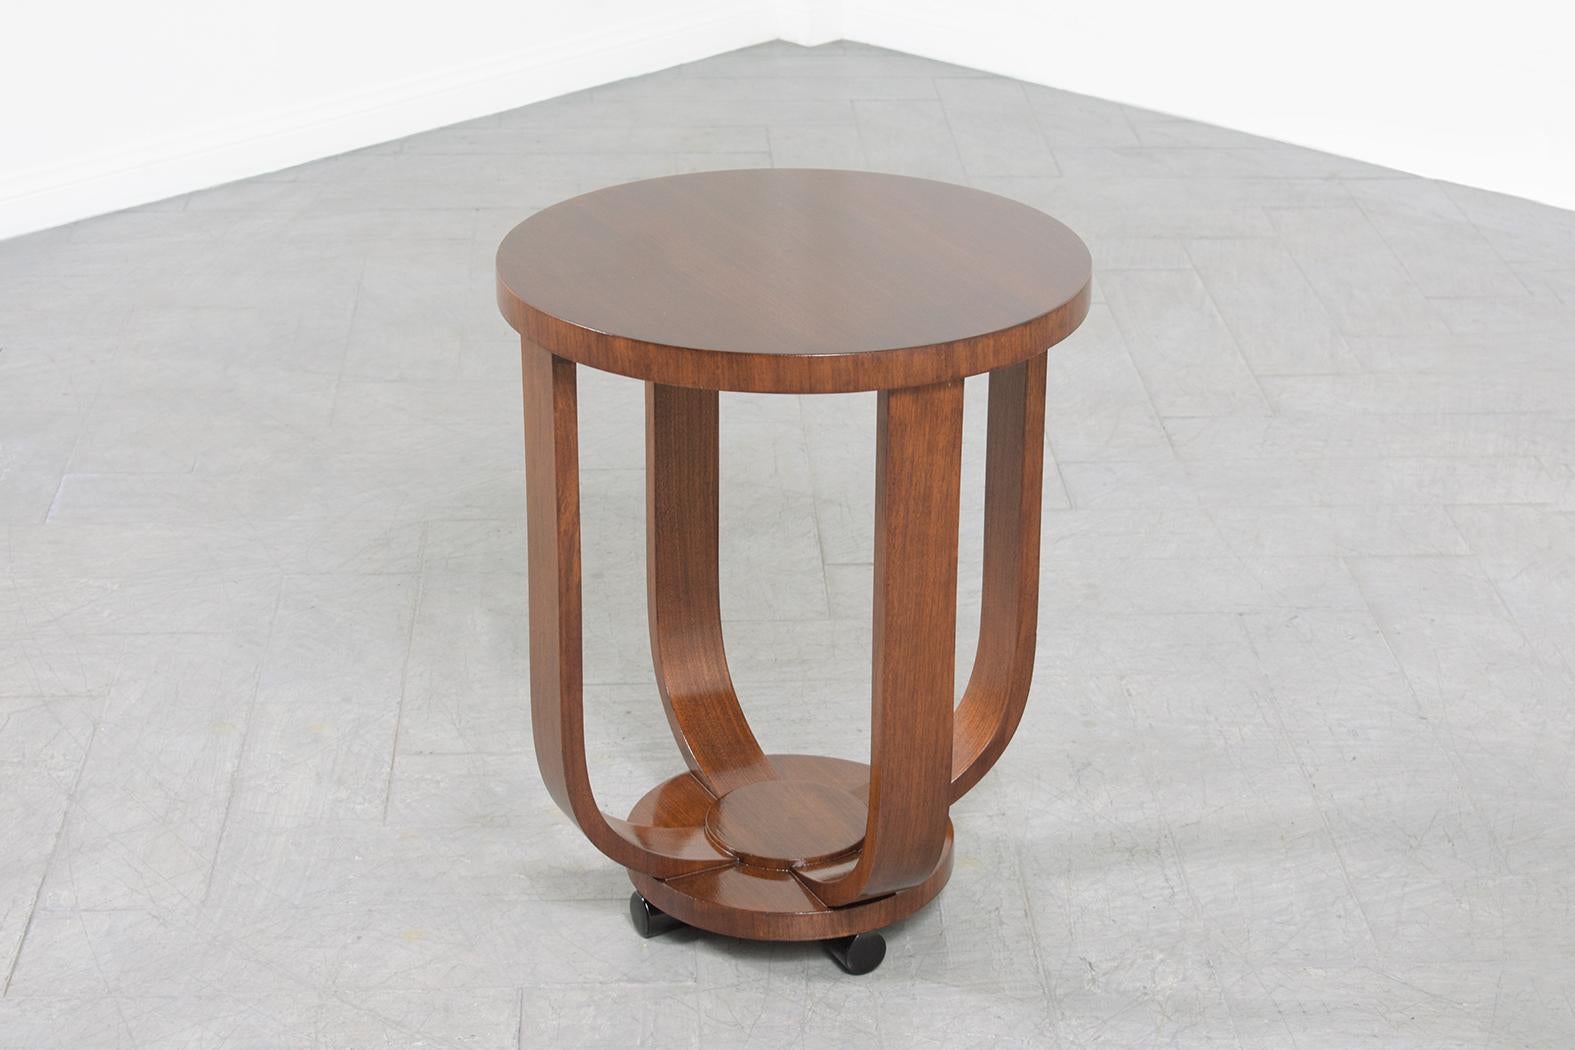 An extraordinary French Art--Deco side table in great condition hand-crafted out of mahogany wood and newly restored and refinished by our professional craftsman team. This circular end table is sleek and modern and features an elegant mahogany